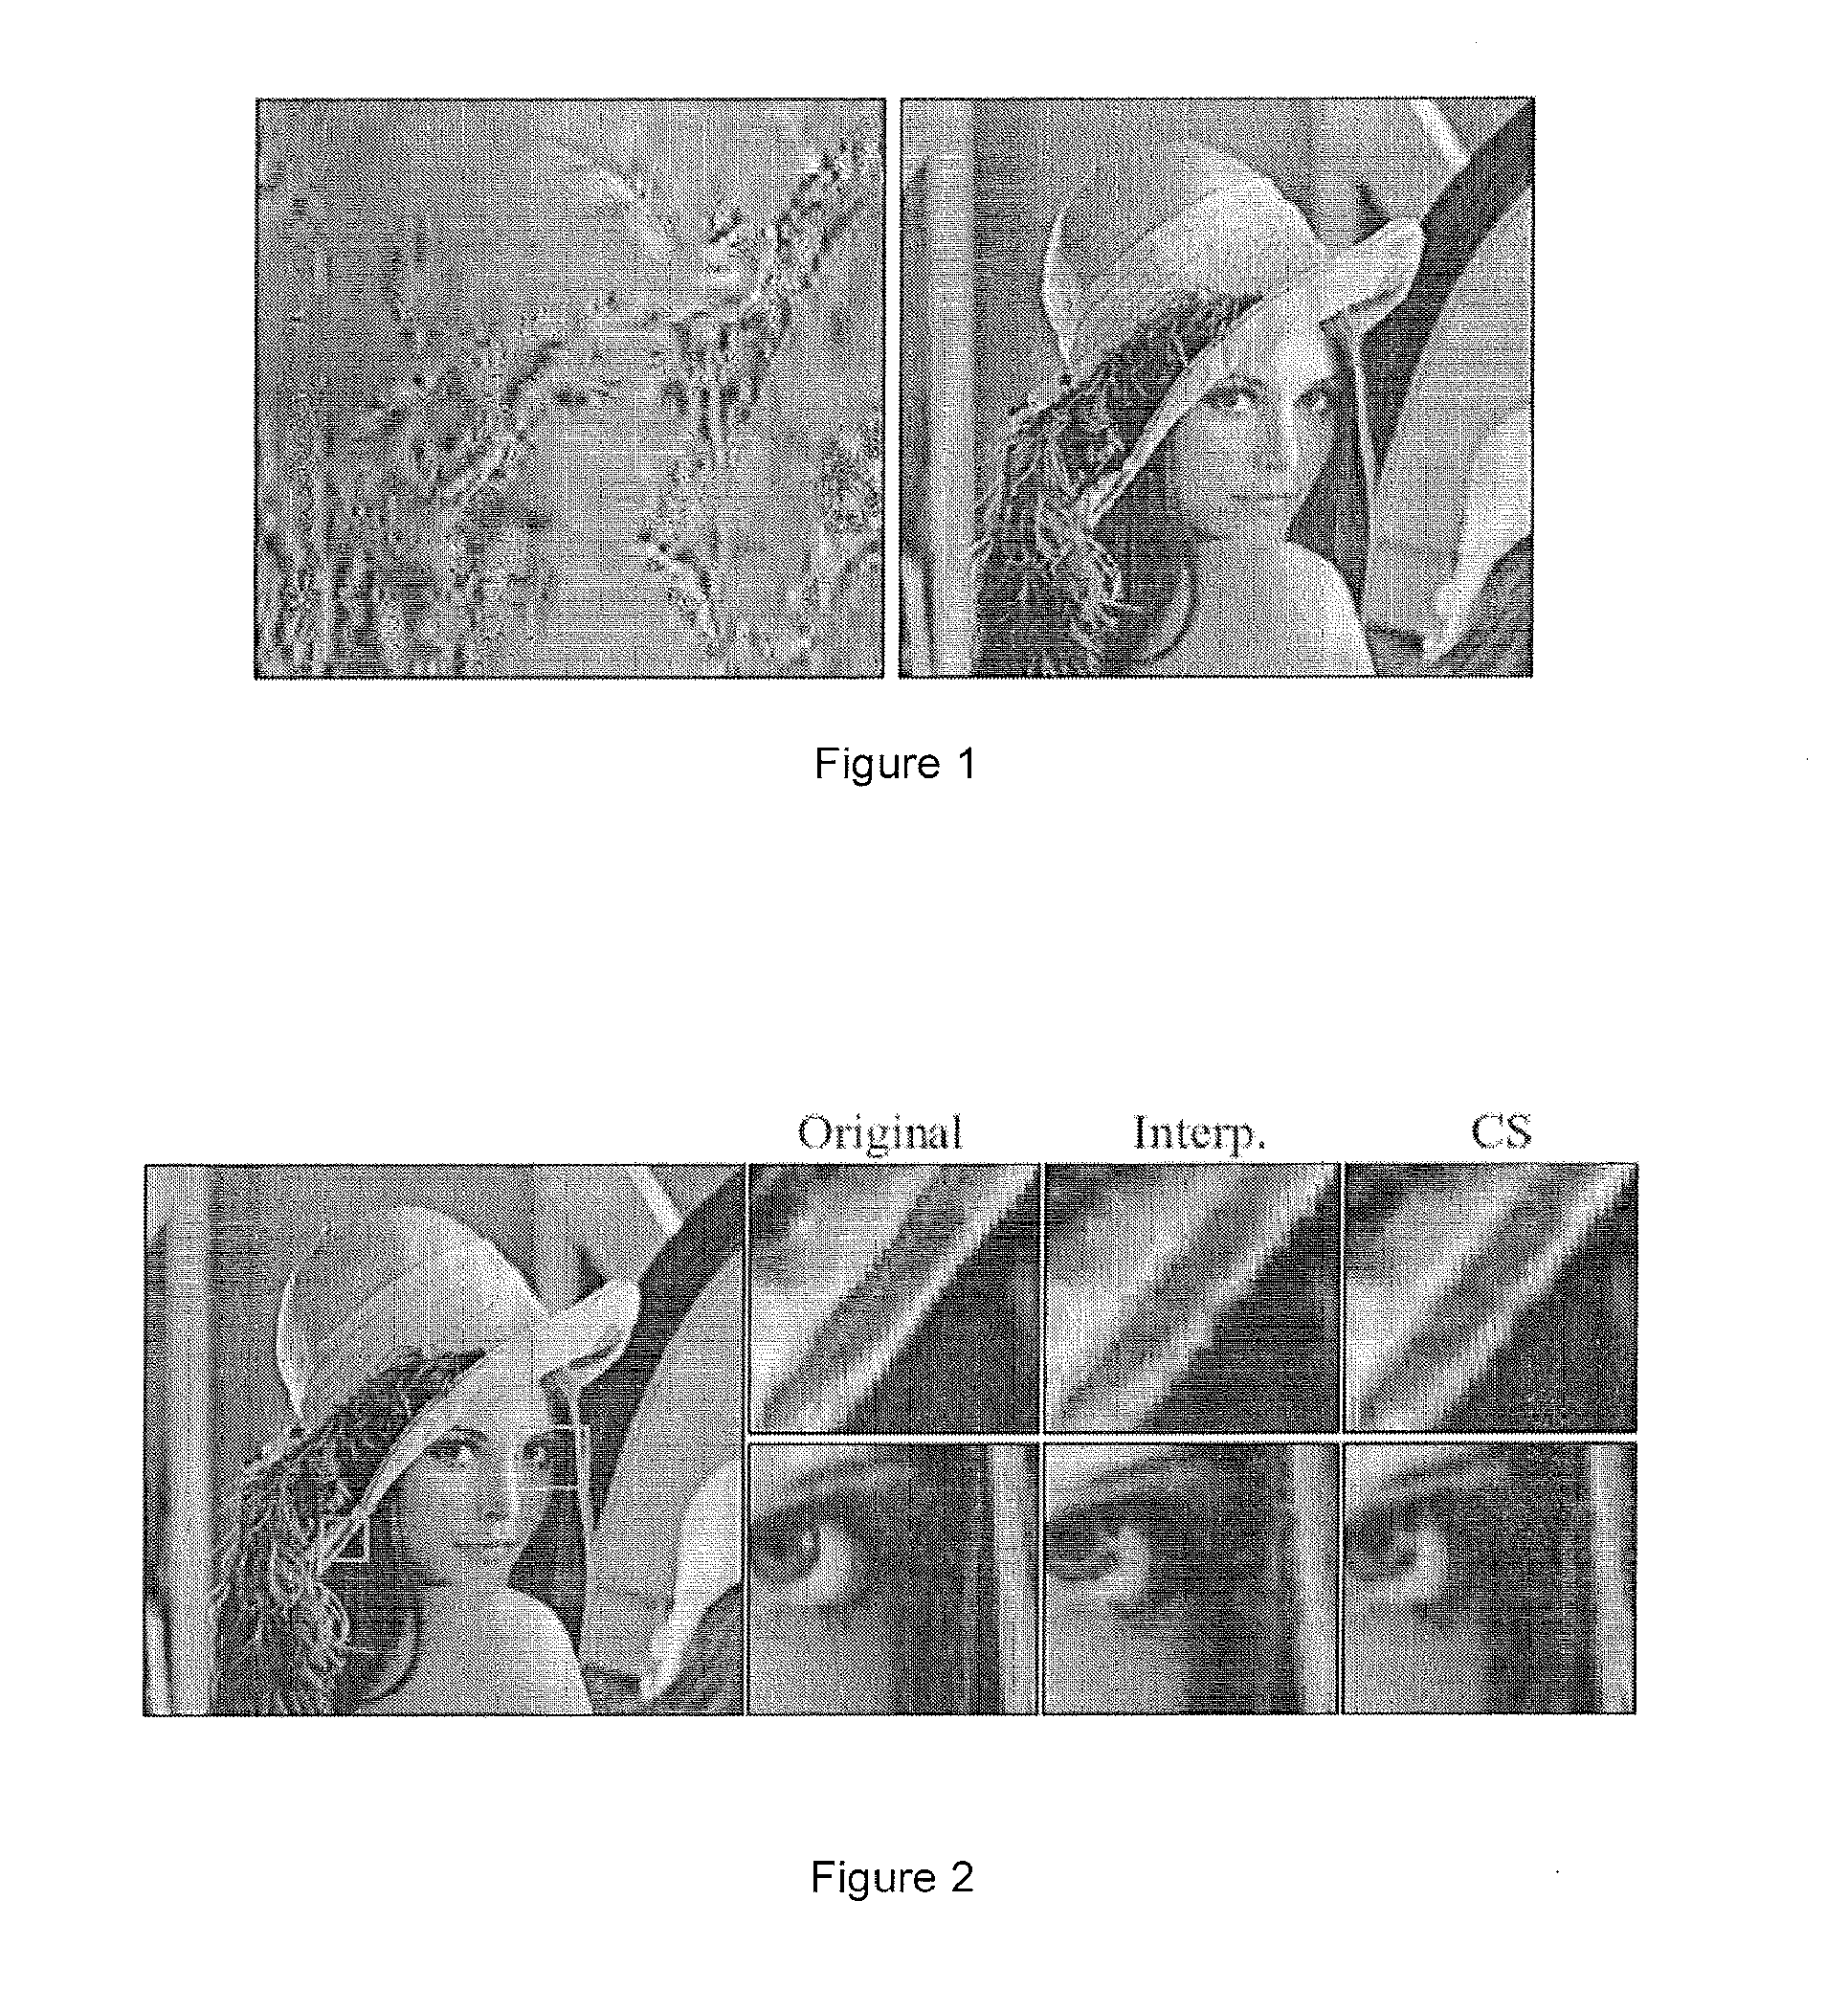 System and methods of compressed sensing as applied to computer graphics and computer imaging